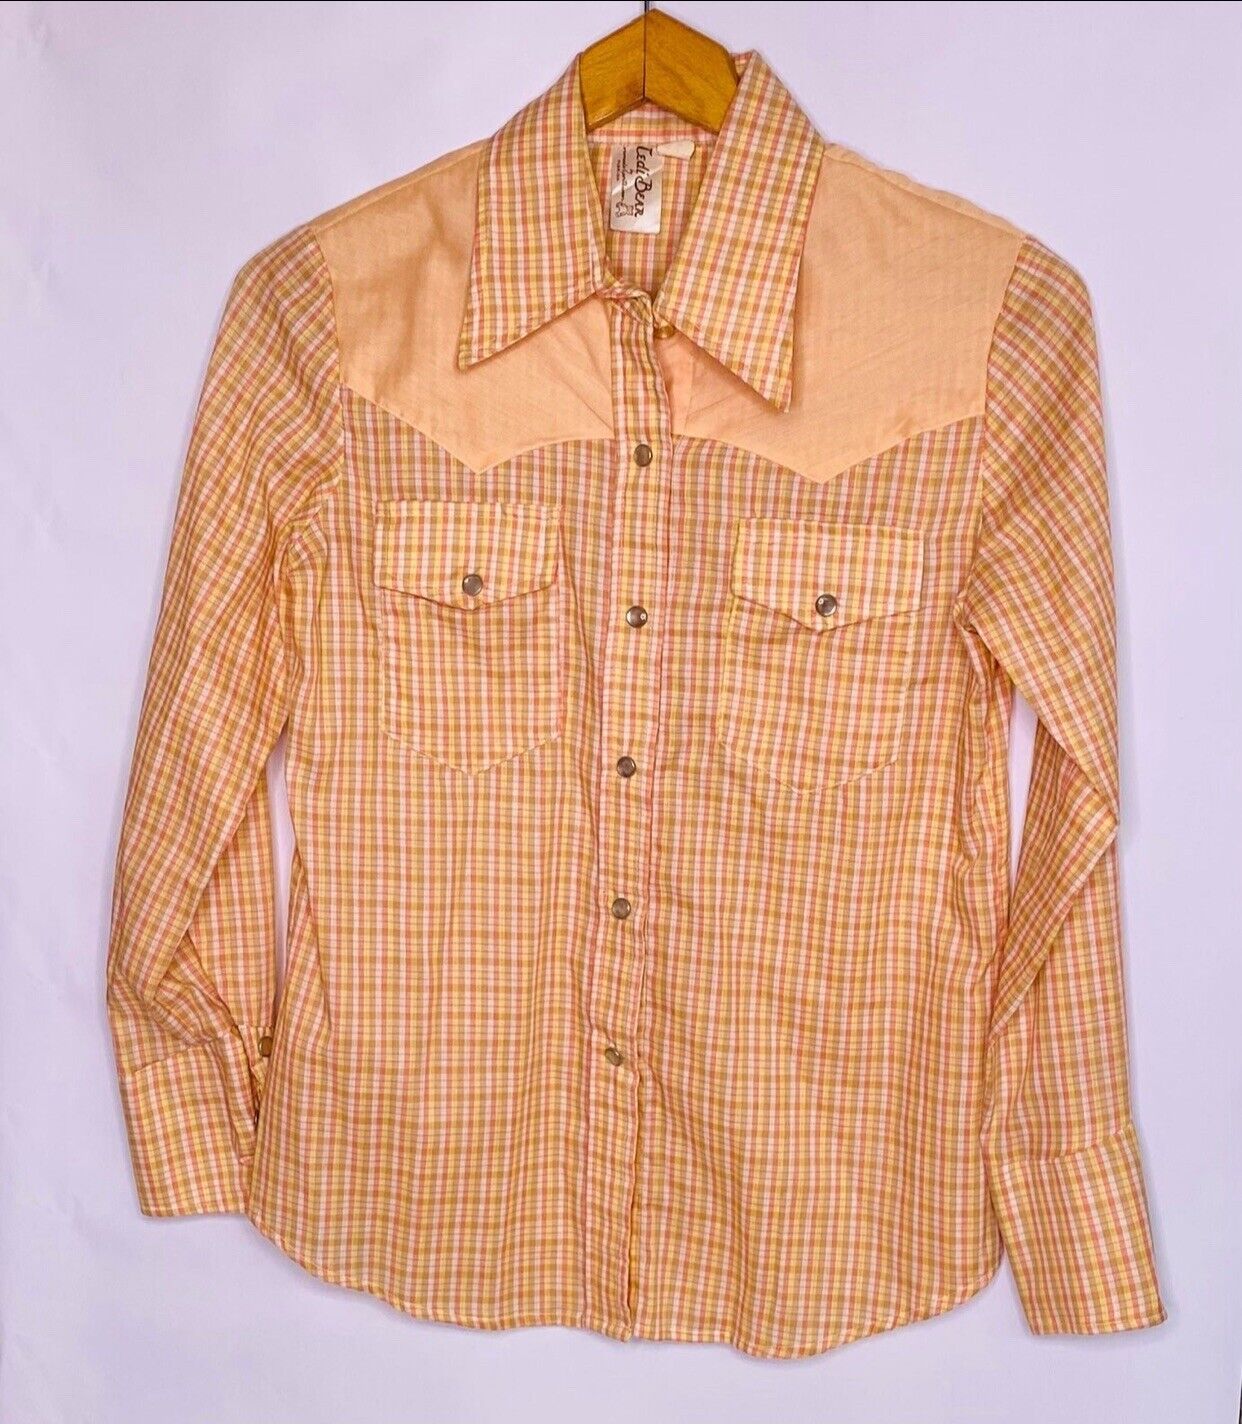 Vintage Women’s 70s Peach Pearl Snap Western Shirt Size Small